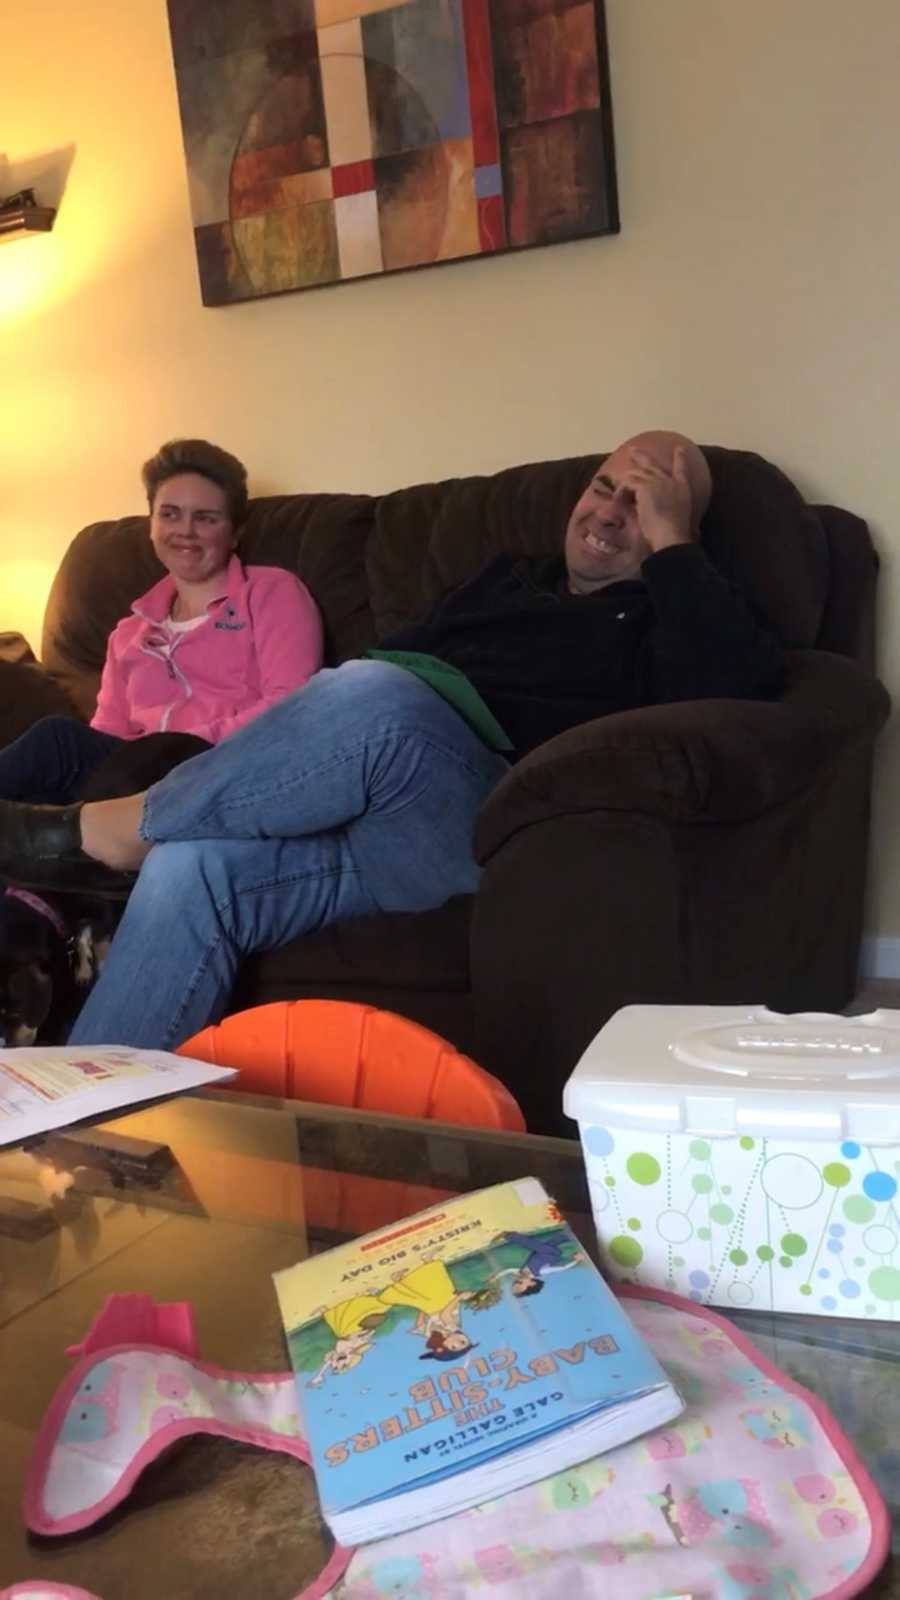 Husband and wife sit on couch in home laughing